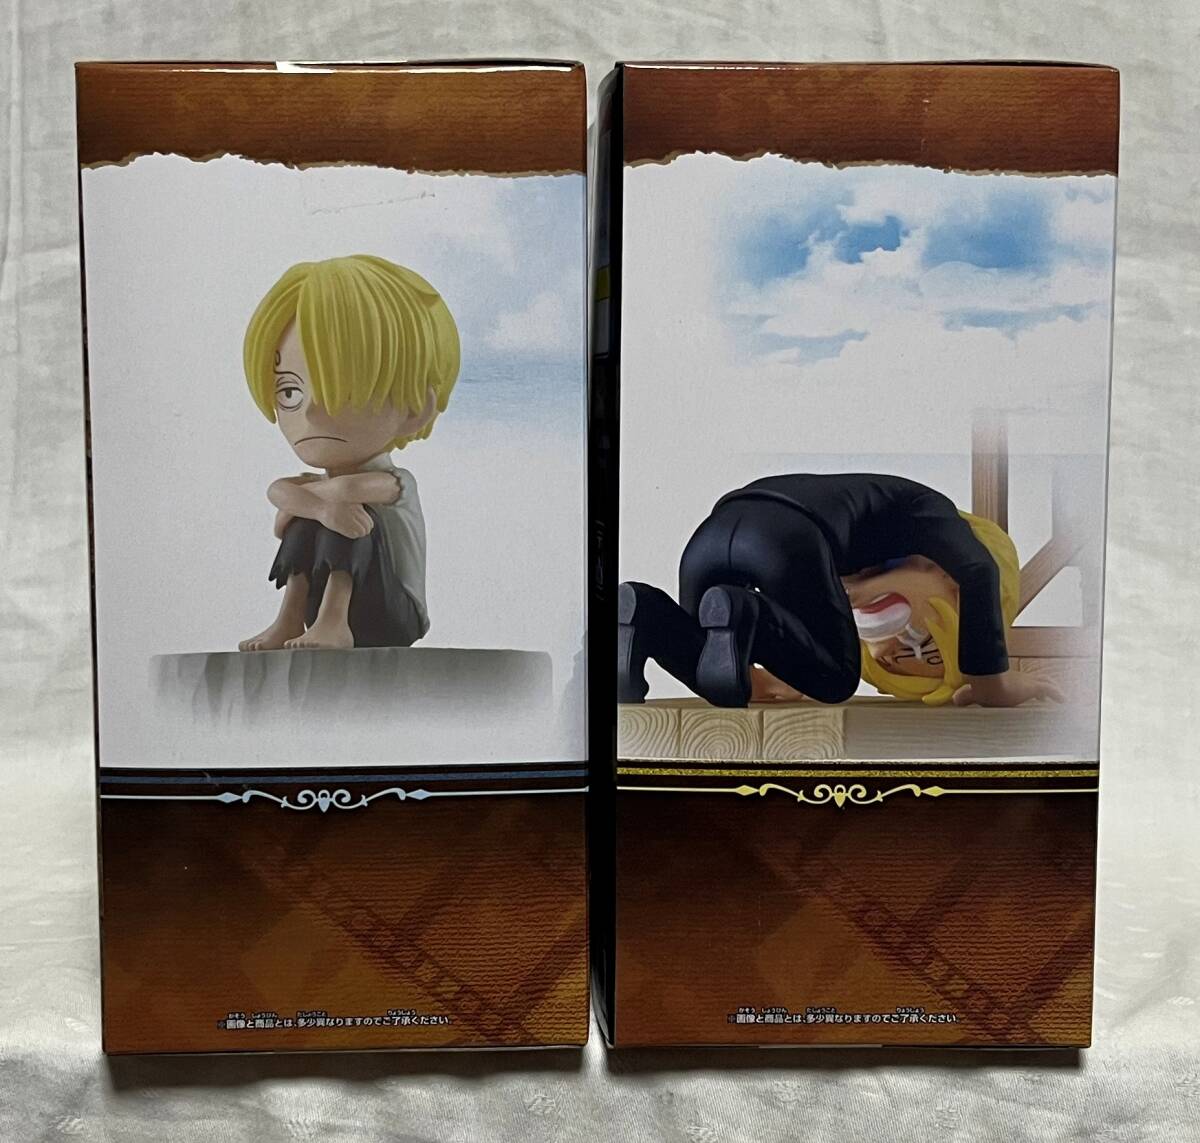  One-piece * world collectable figure ro Gusto - Lee z*2 kind set * Sanji &zef+ [.. care became!]